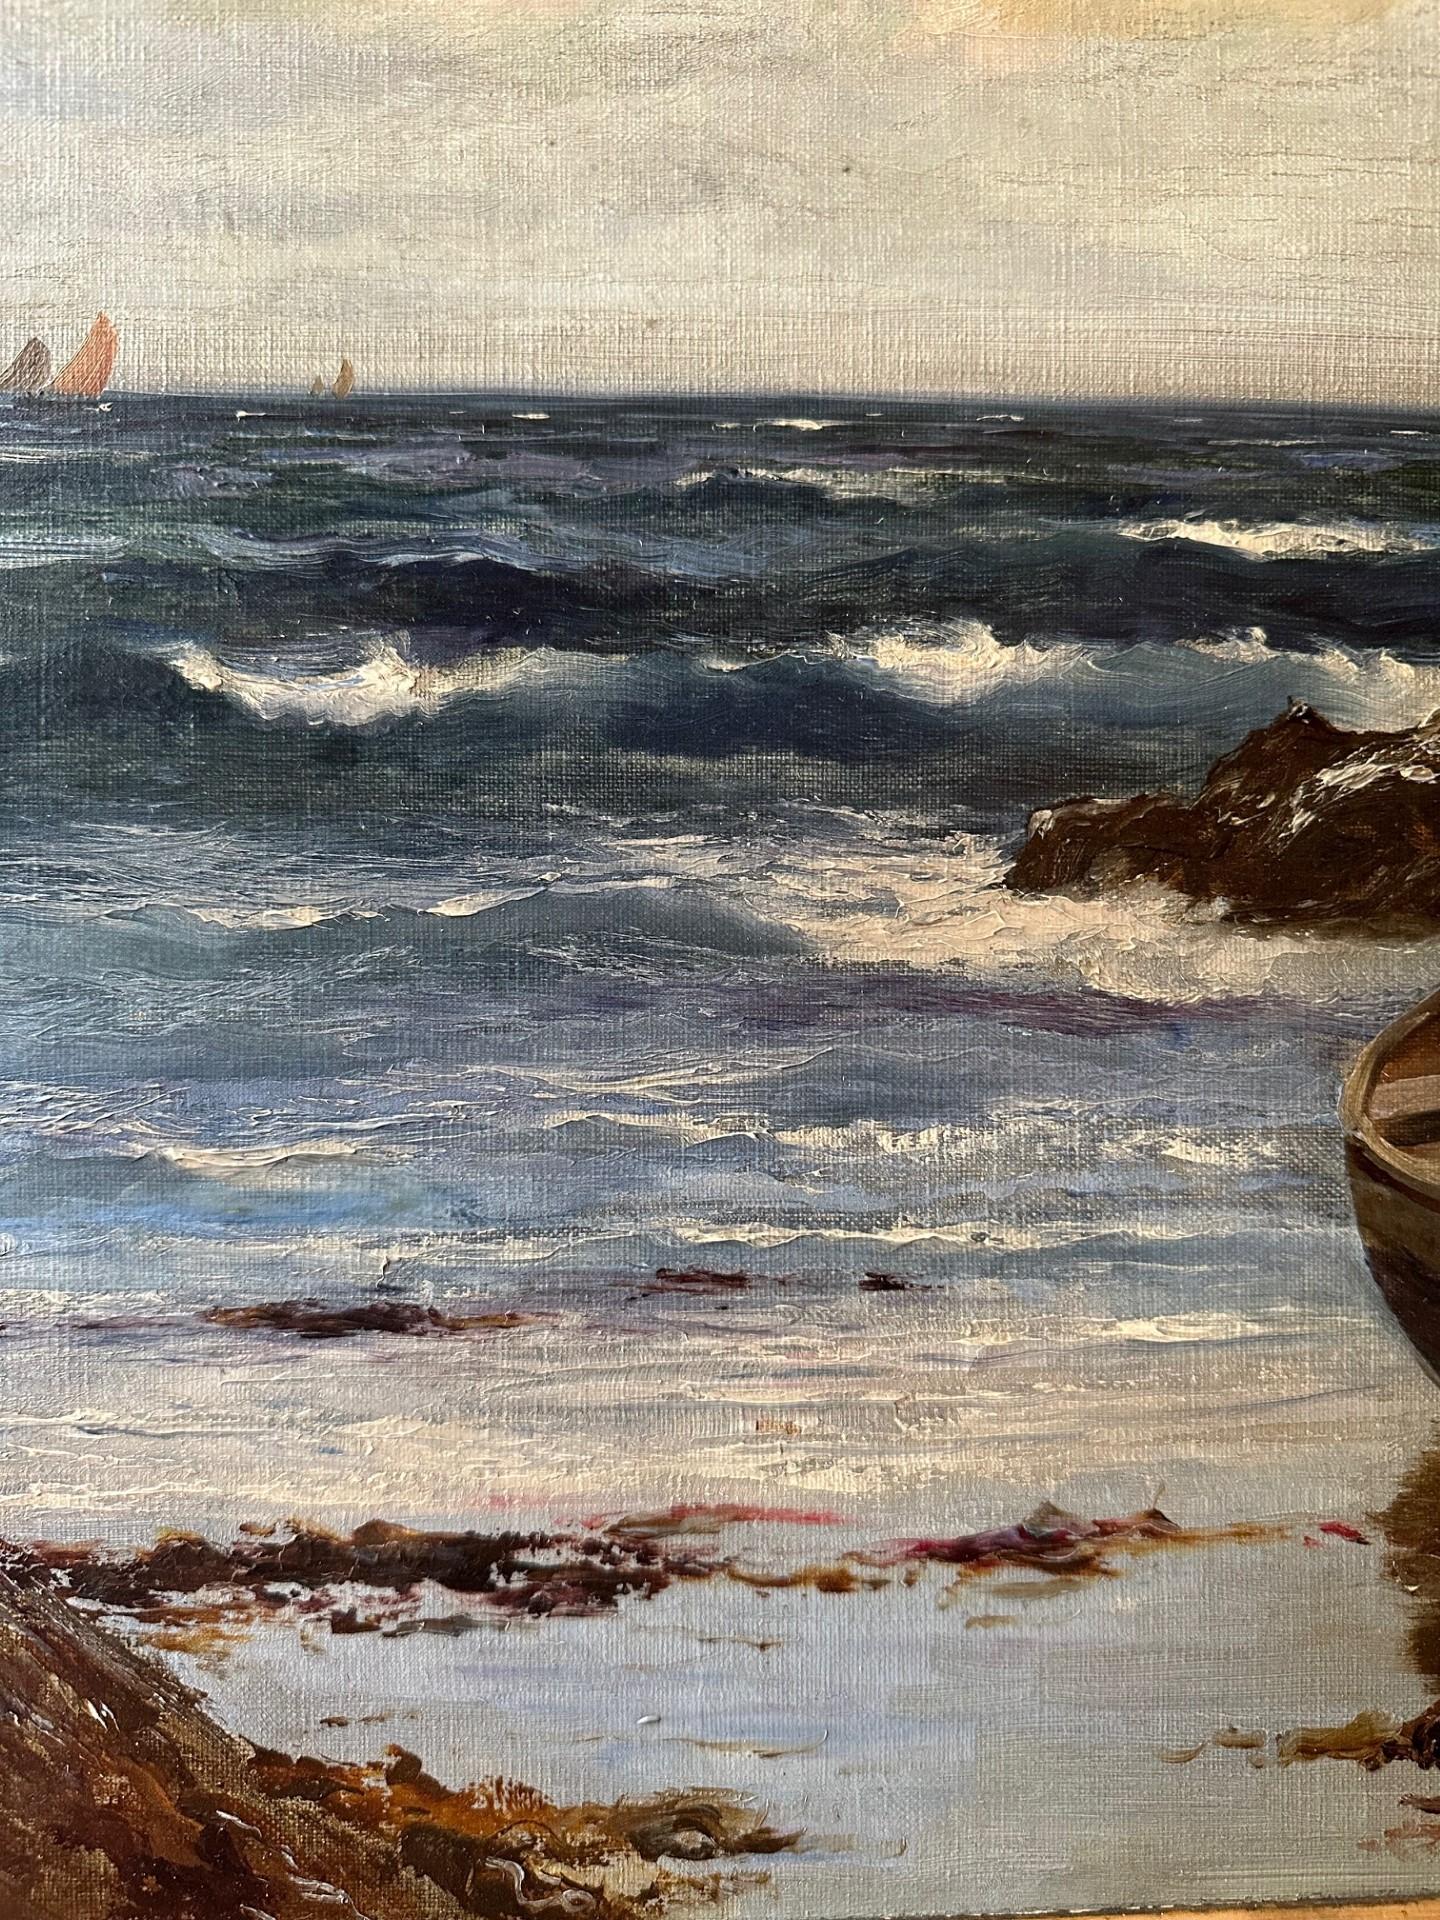 Hand-Painted Richard Wane (1852-1904) Seascape Oil Painting, “Waiting for the Tide”. For Sale